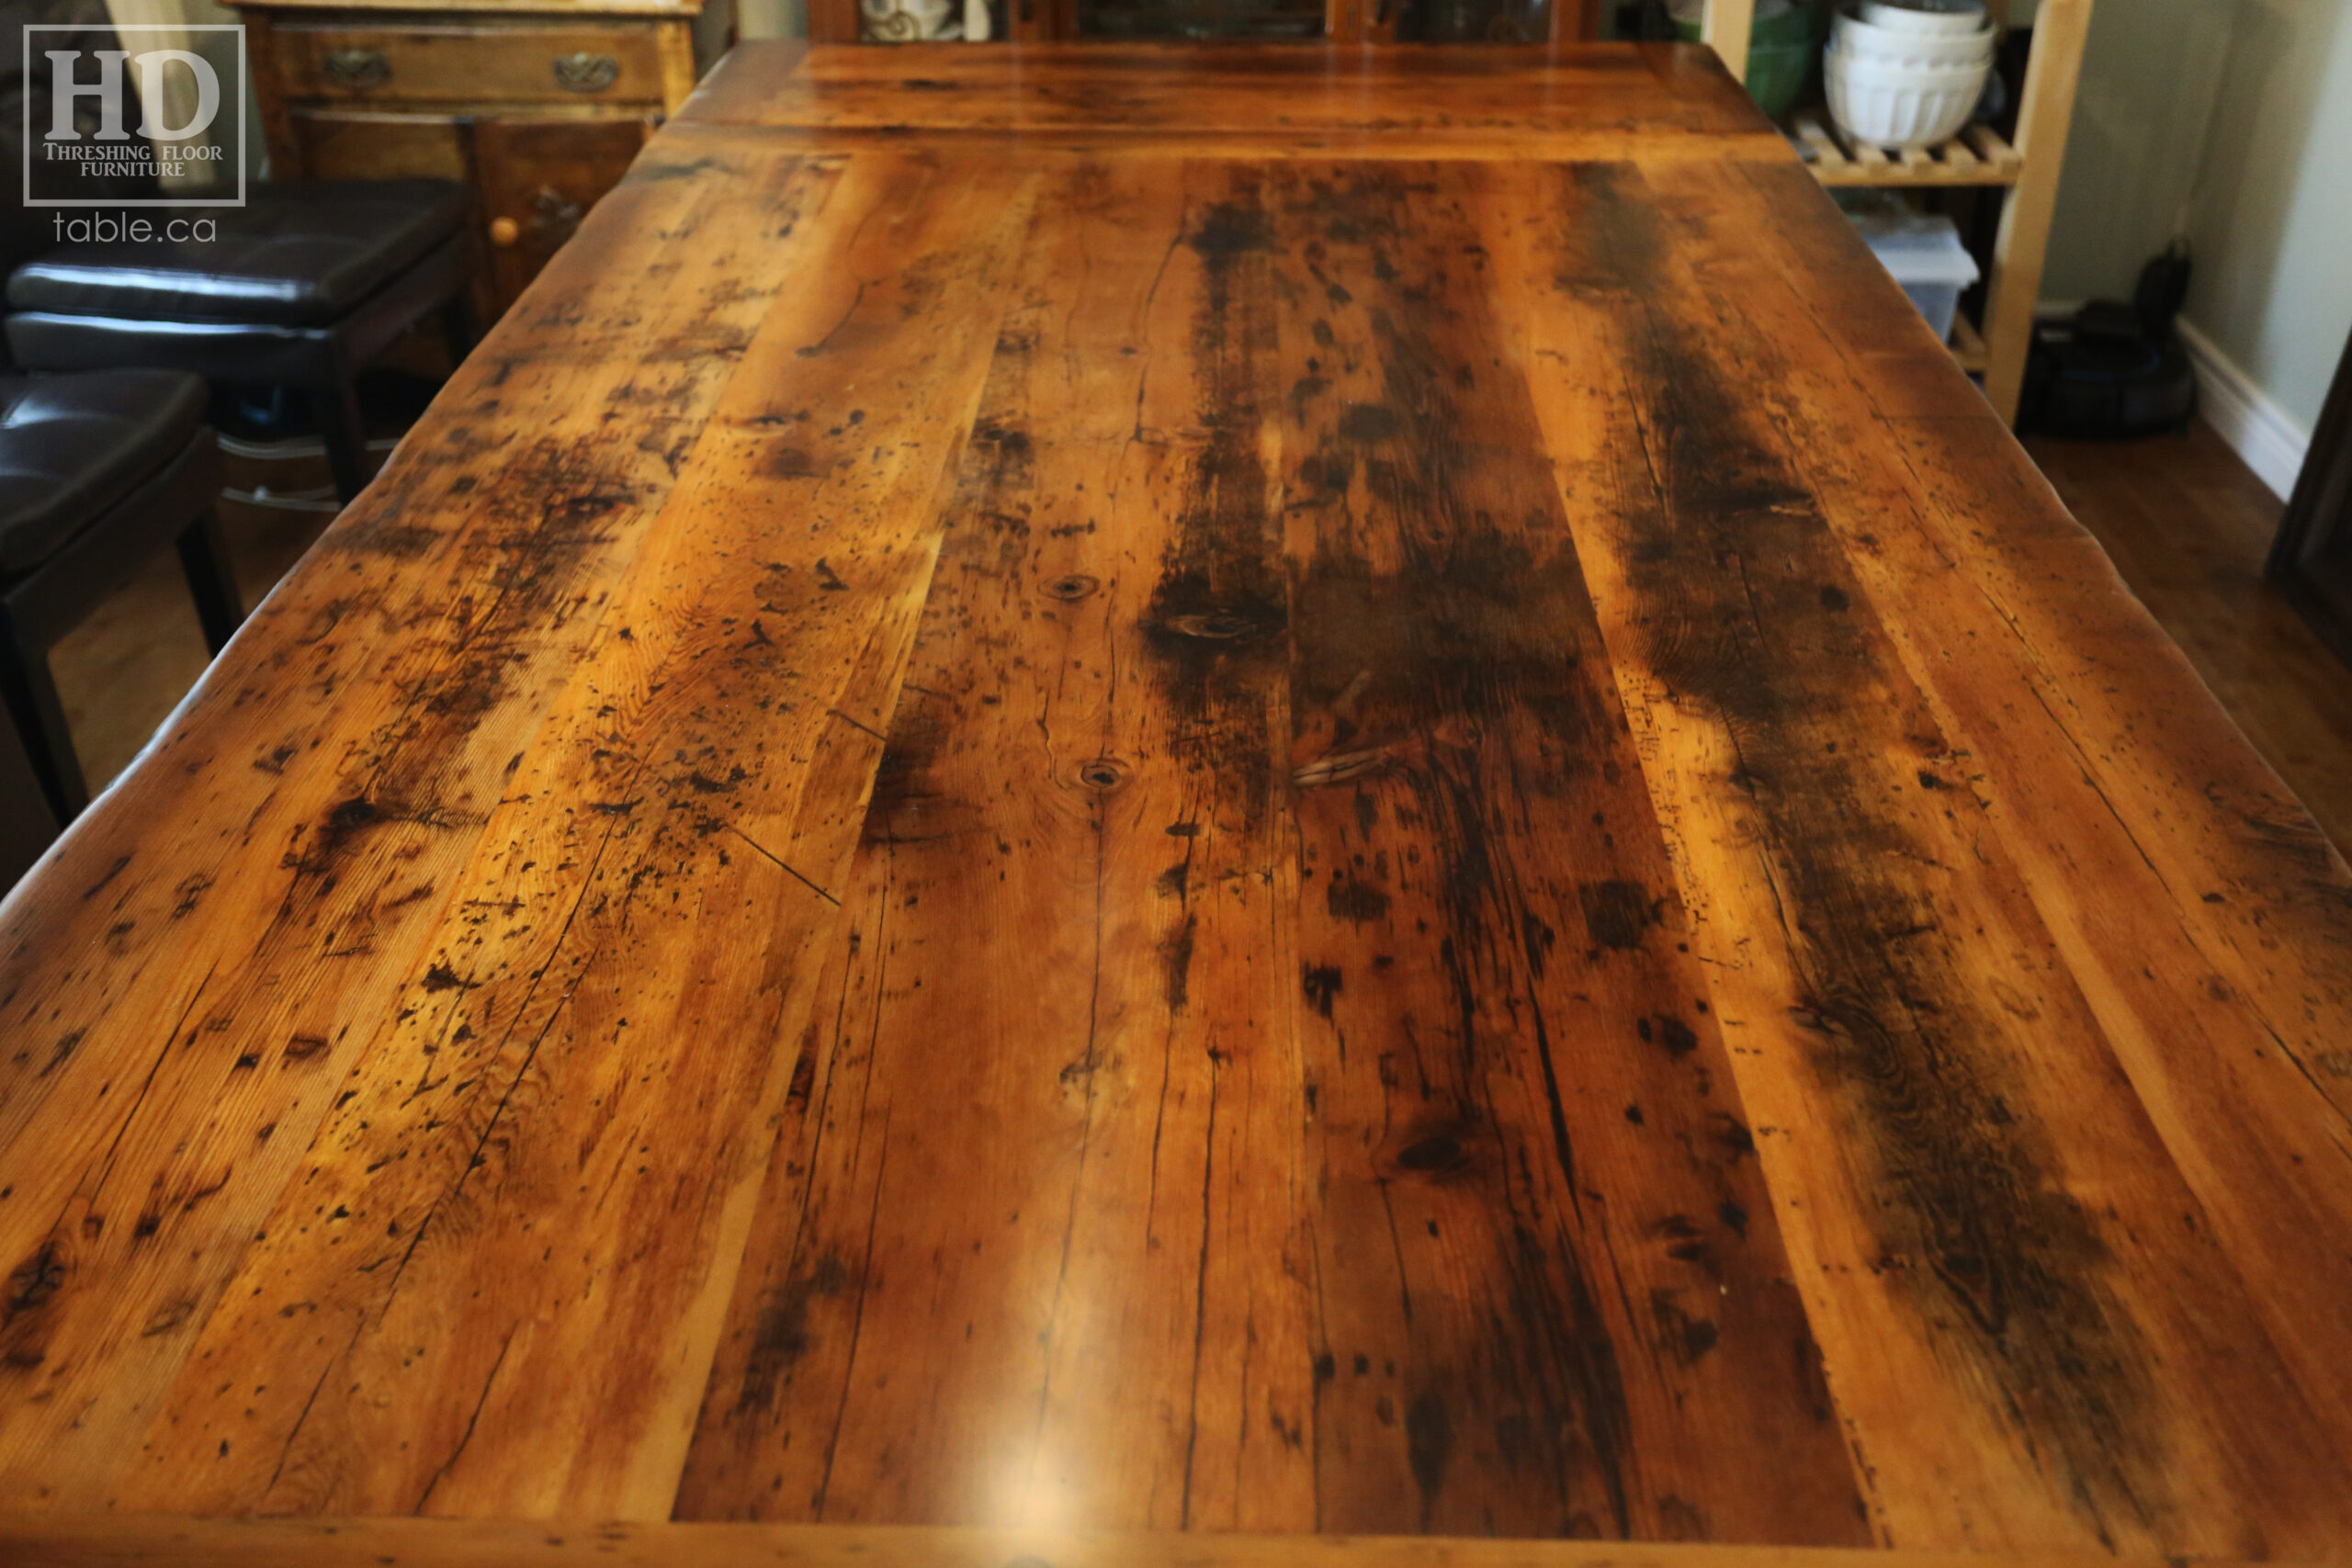 7' Ontario barnwood trestle table we made for an Ingersoll, ON company - 48" wide - 2" Hemlock Threshing Floor Construction - Original edges & distressing maintained - Premium epoxy + satin polyurethane finish - Two 18" leaf extensions [making total length 10' when extended] - www.table.ca